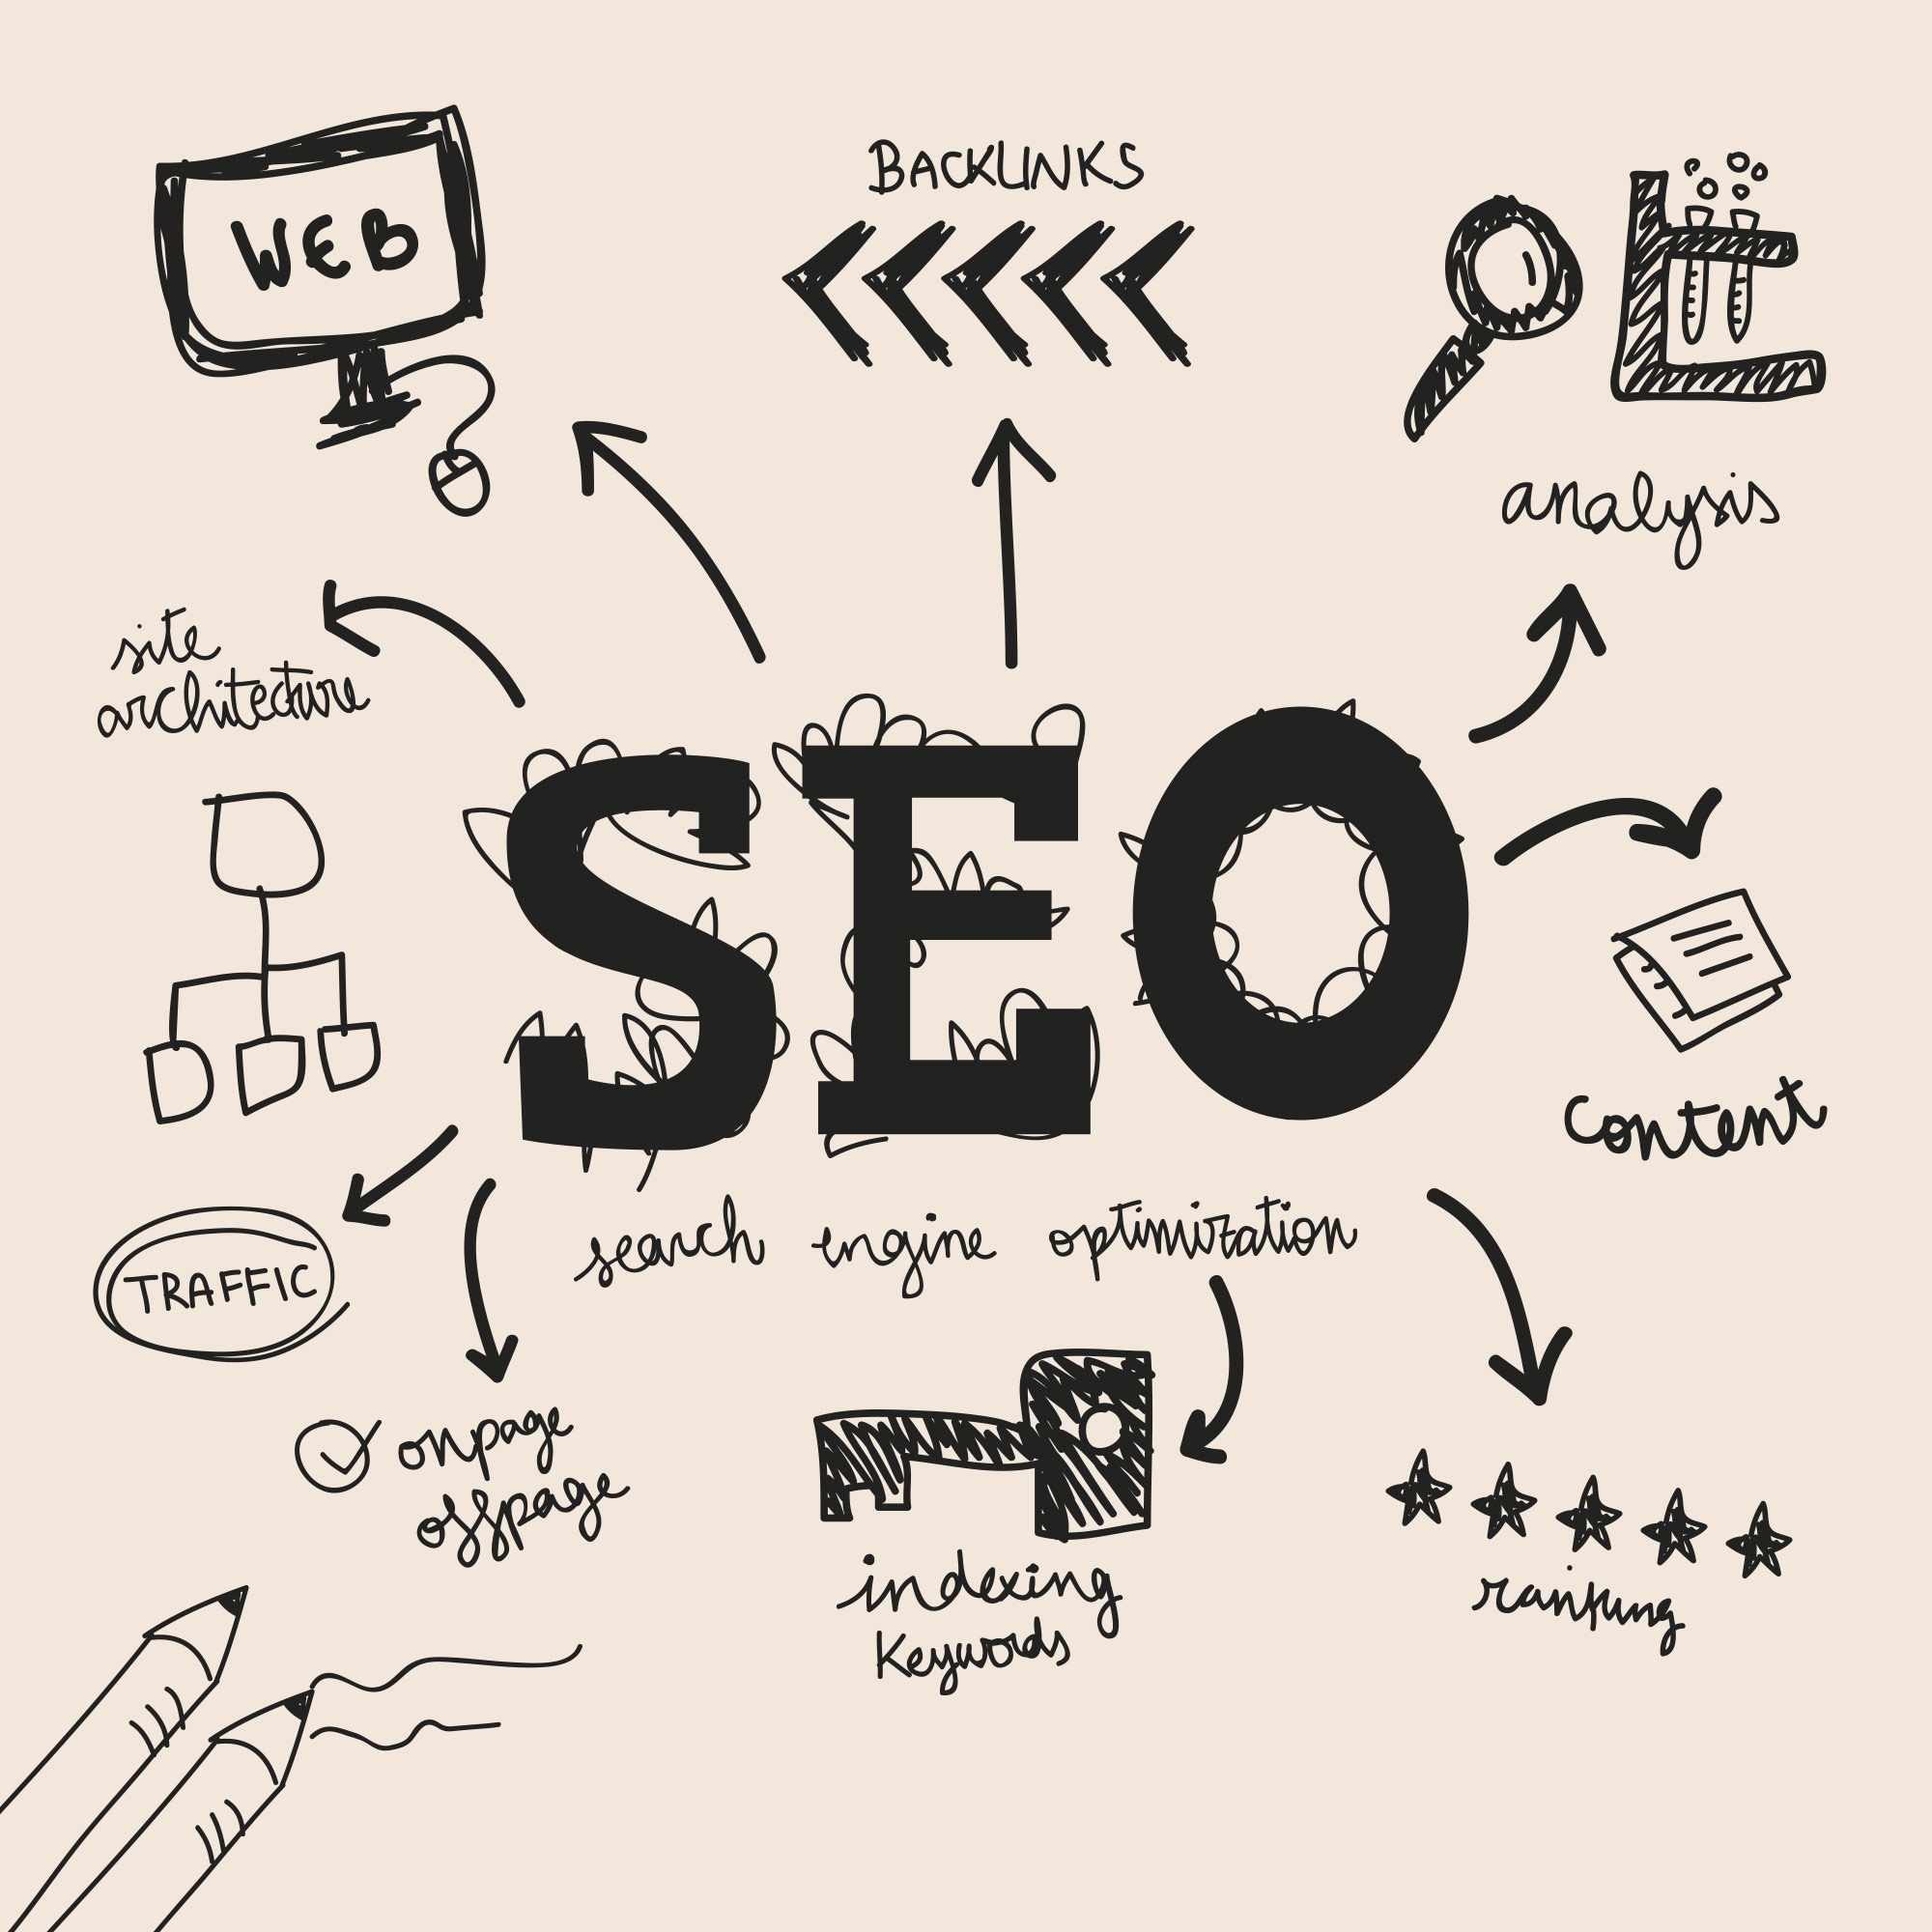 Your Guide To Search Engine Optimization